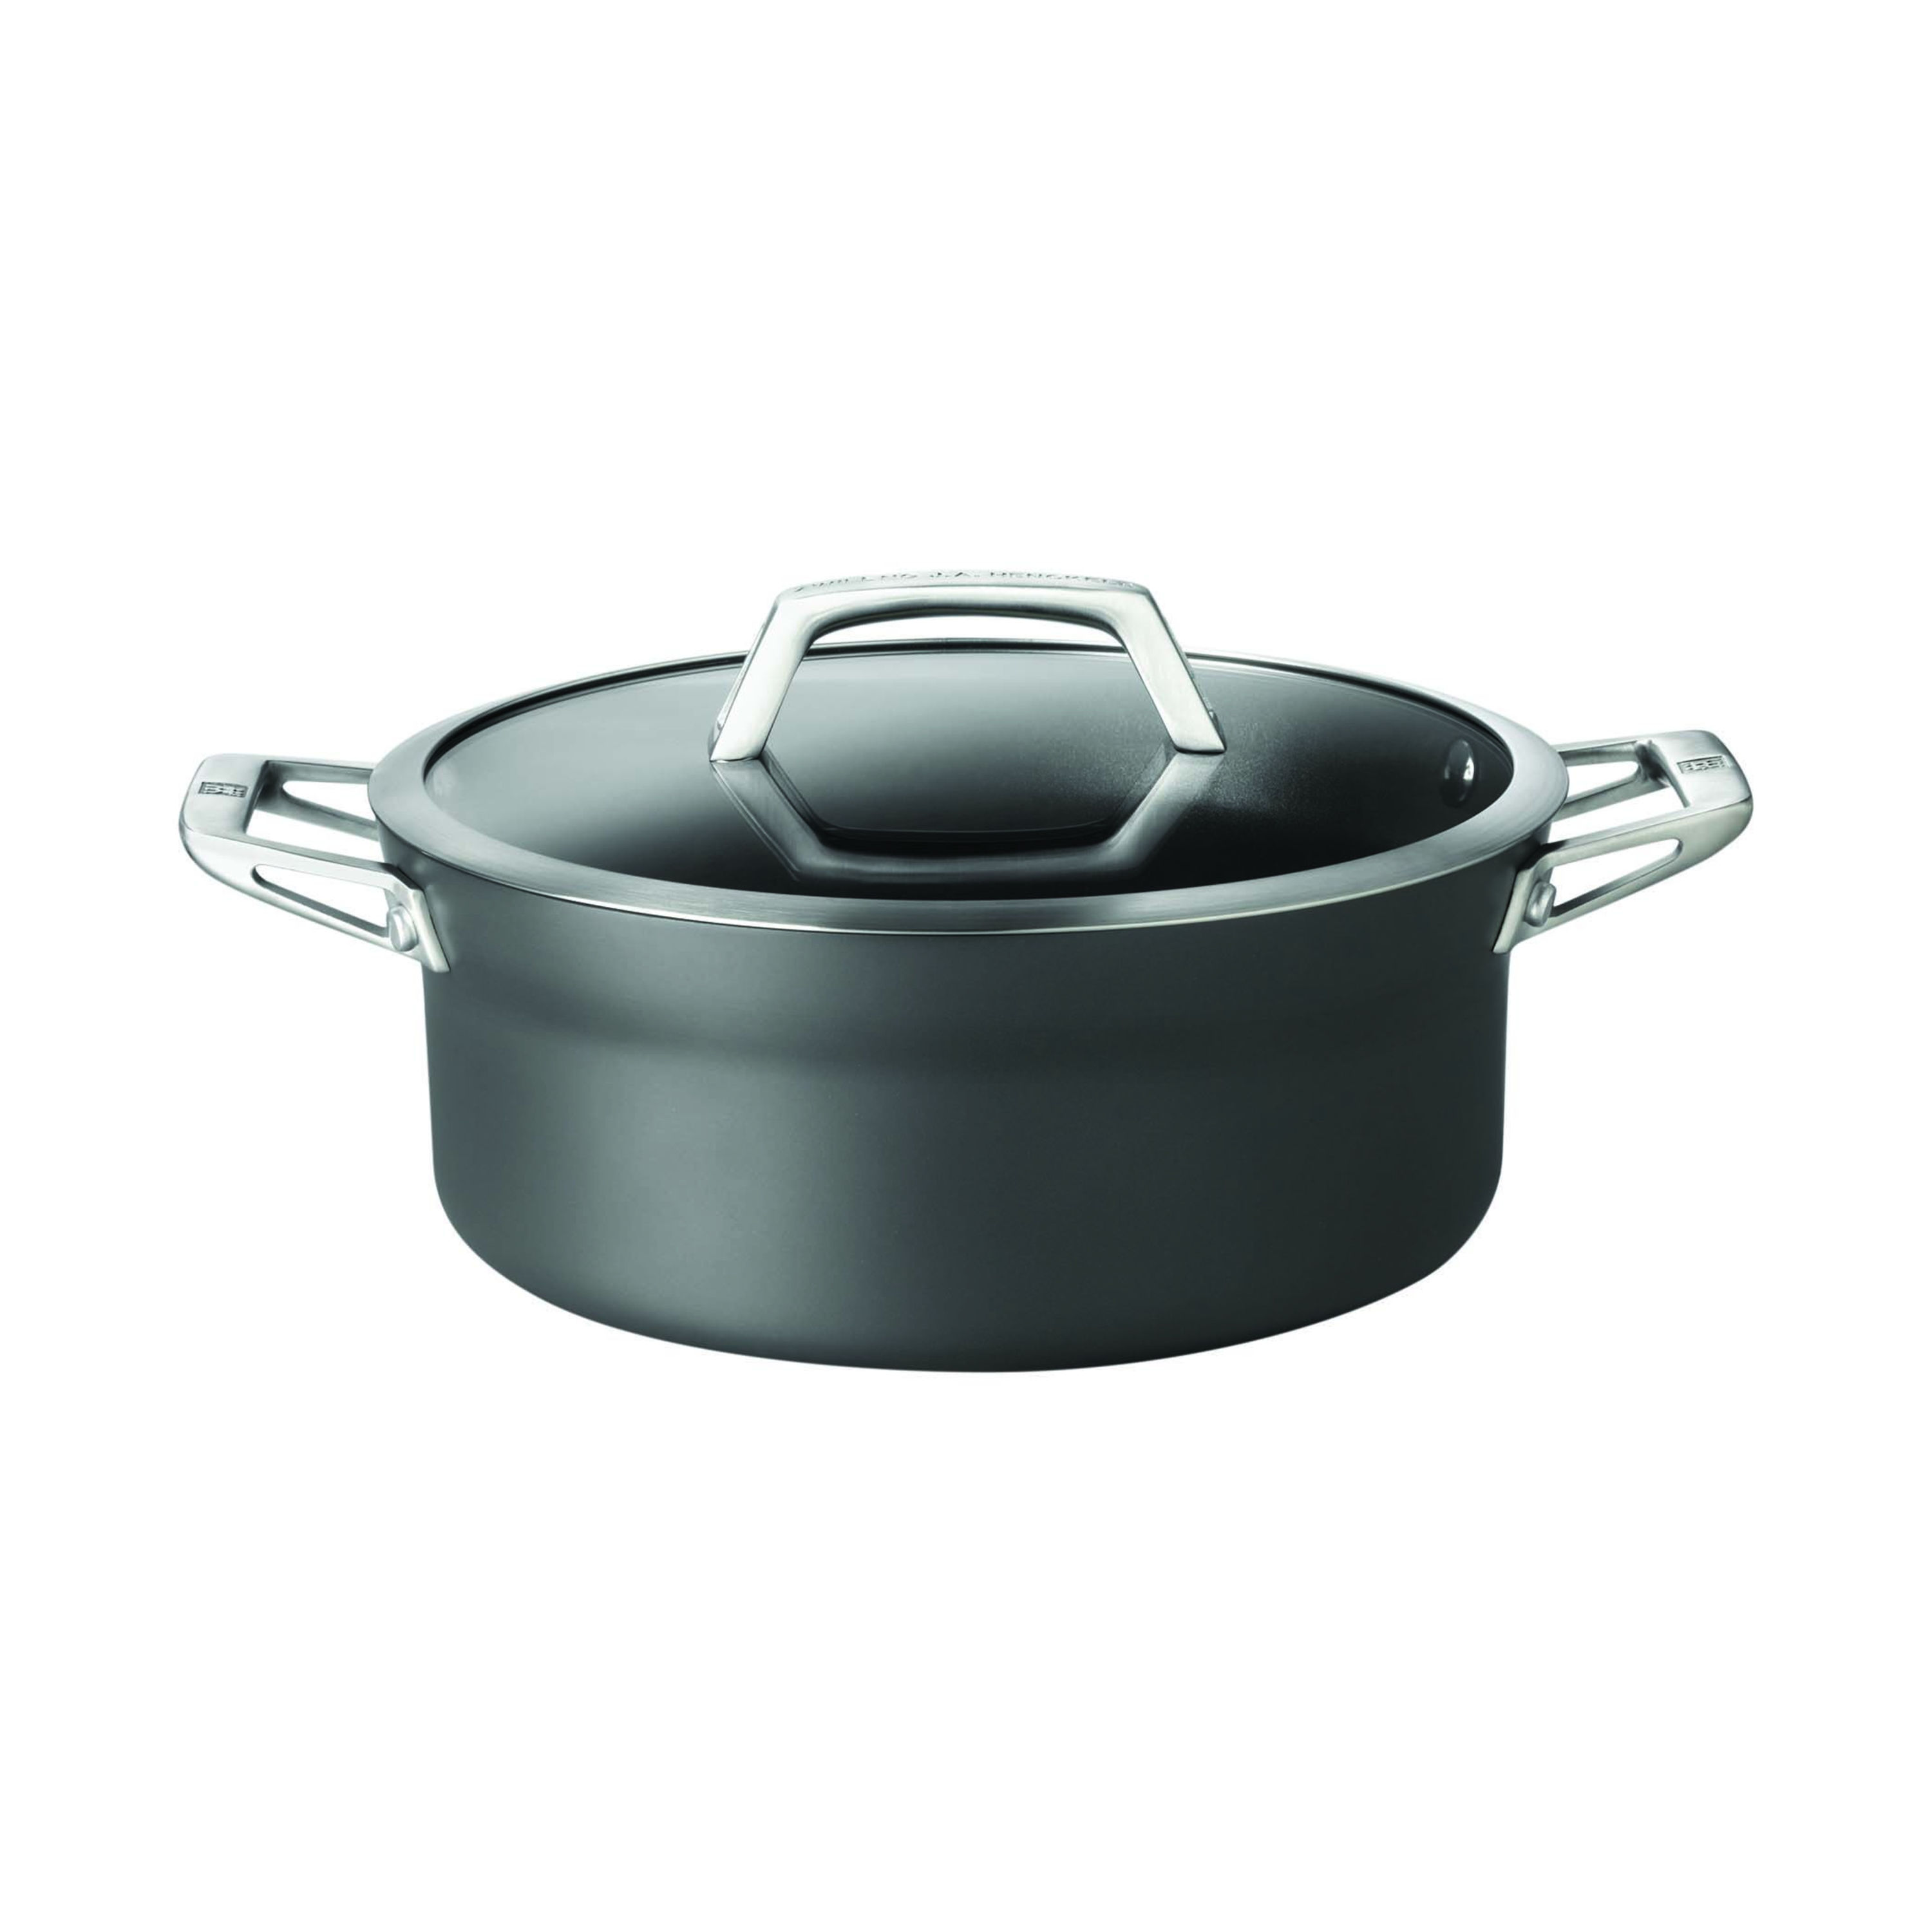 1pc, 8 Dutch Oven With Lid, Traditional Style Heat Resistant Cast Iron  Pan, Ergonomic Slow Cook Handle, For Baking Pasta, Diameter 22CM